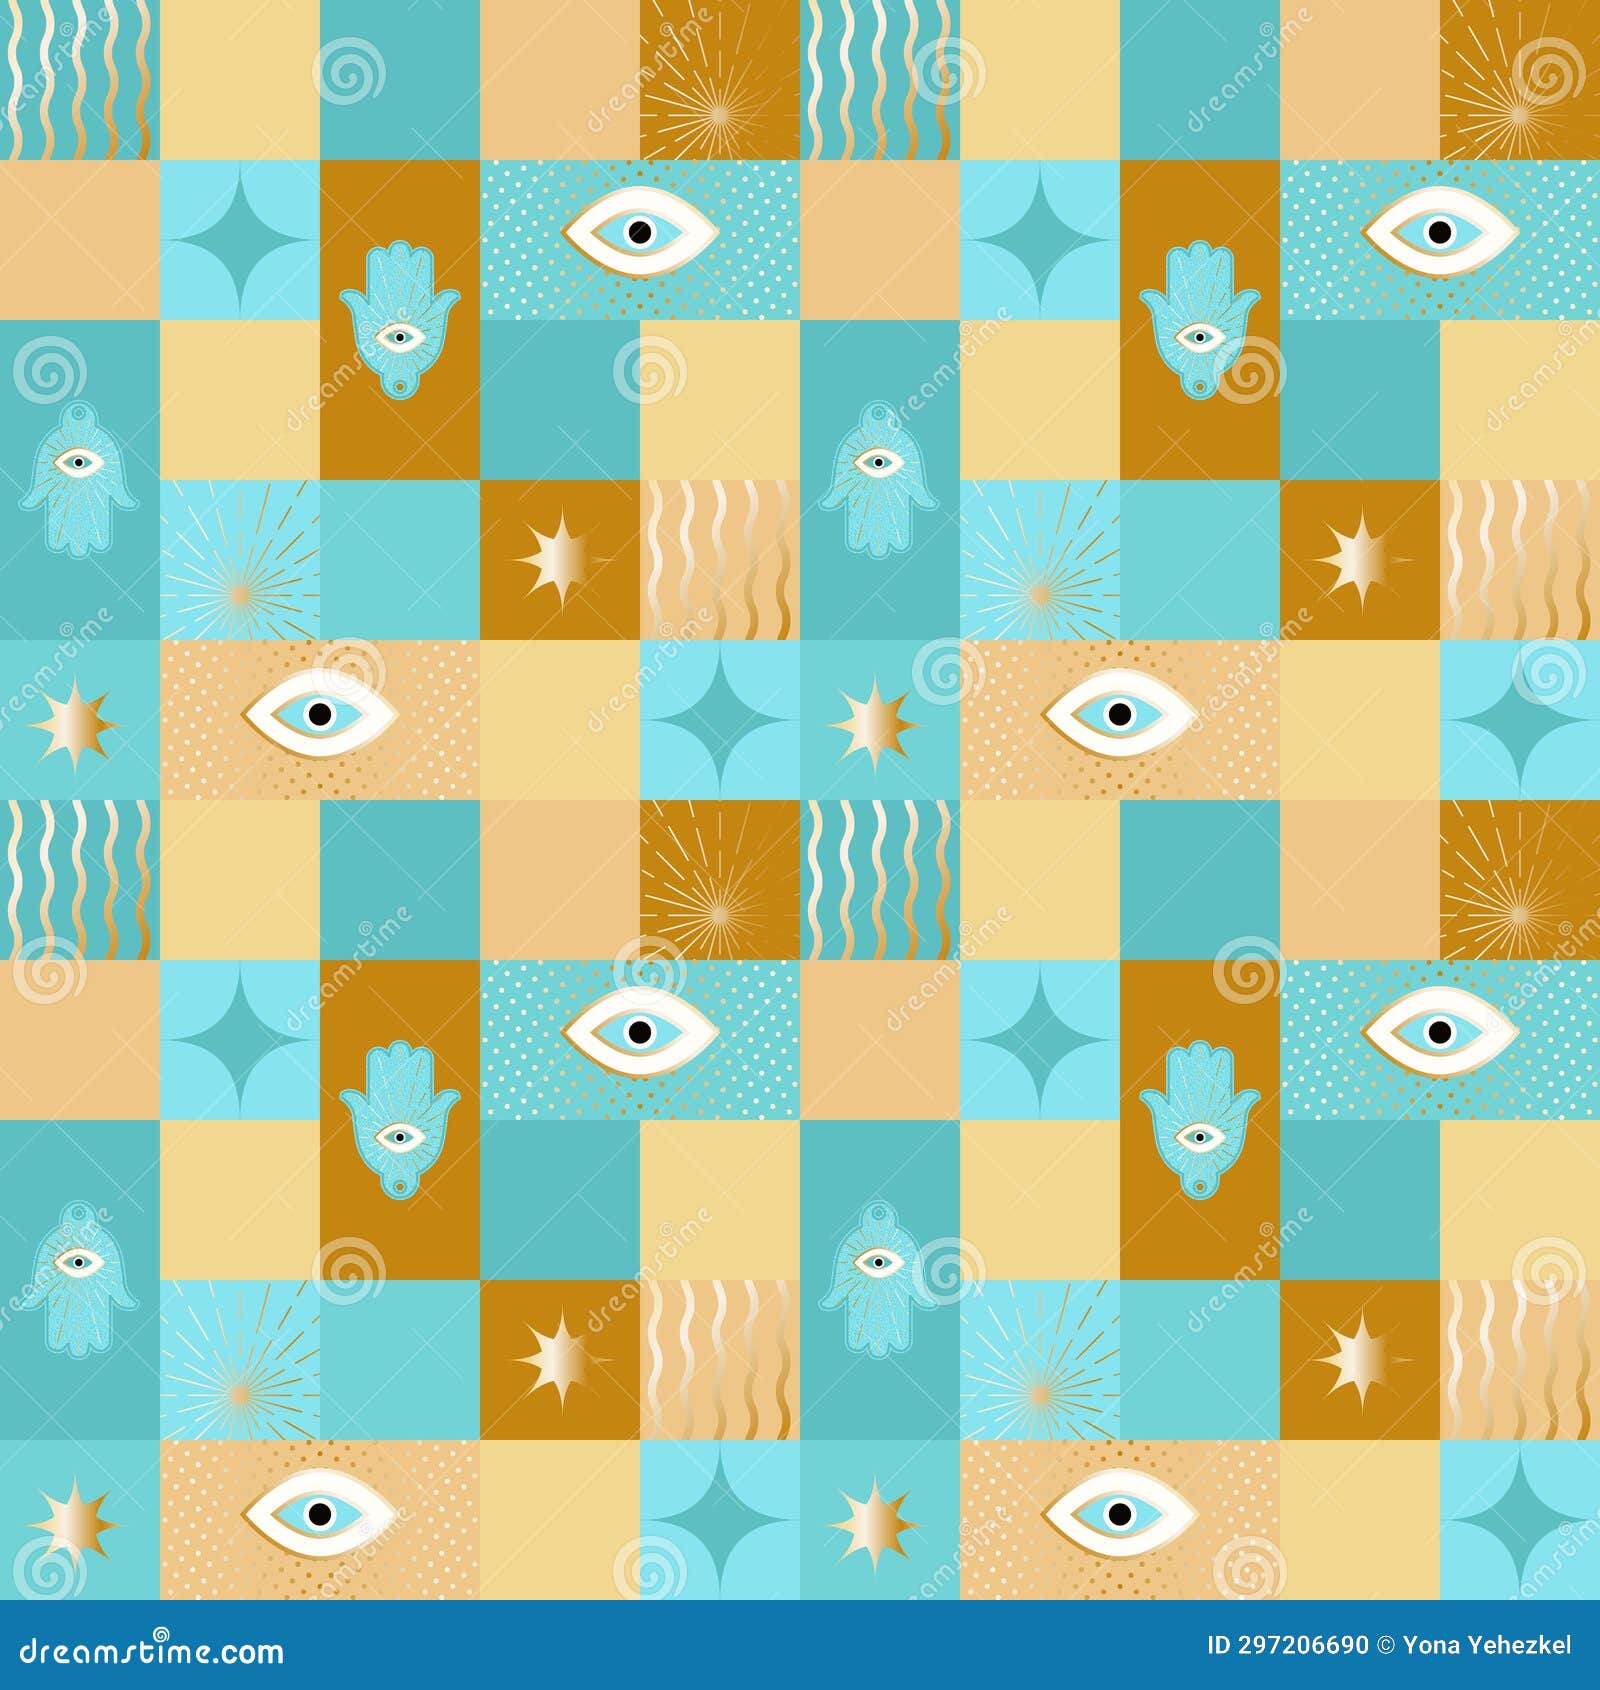 hamsa, ?vil ?ye, stars and dots seamless in turquoise and gold on plaid background